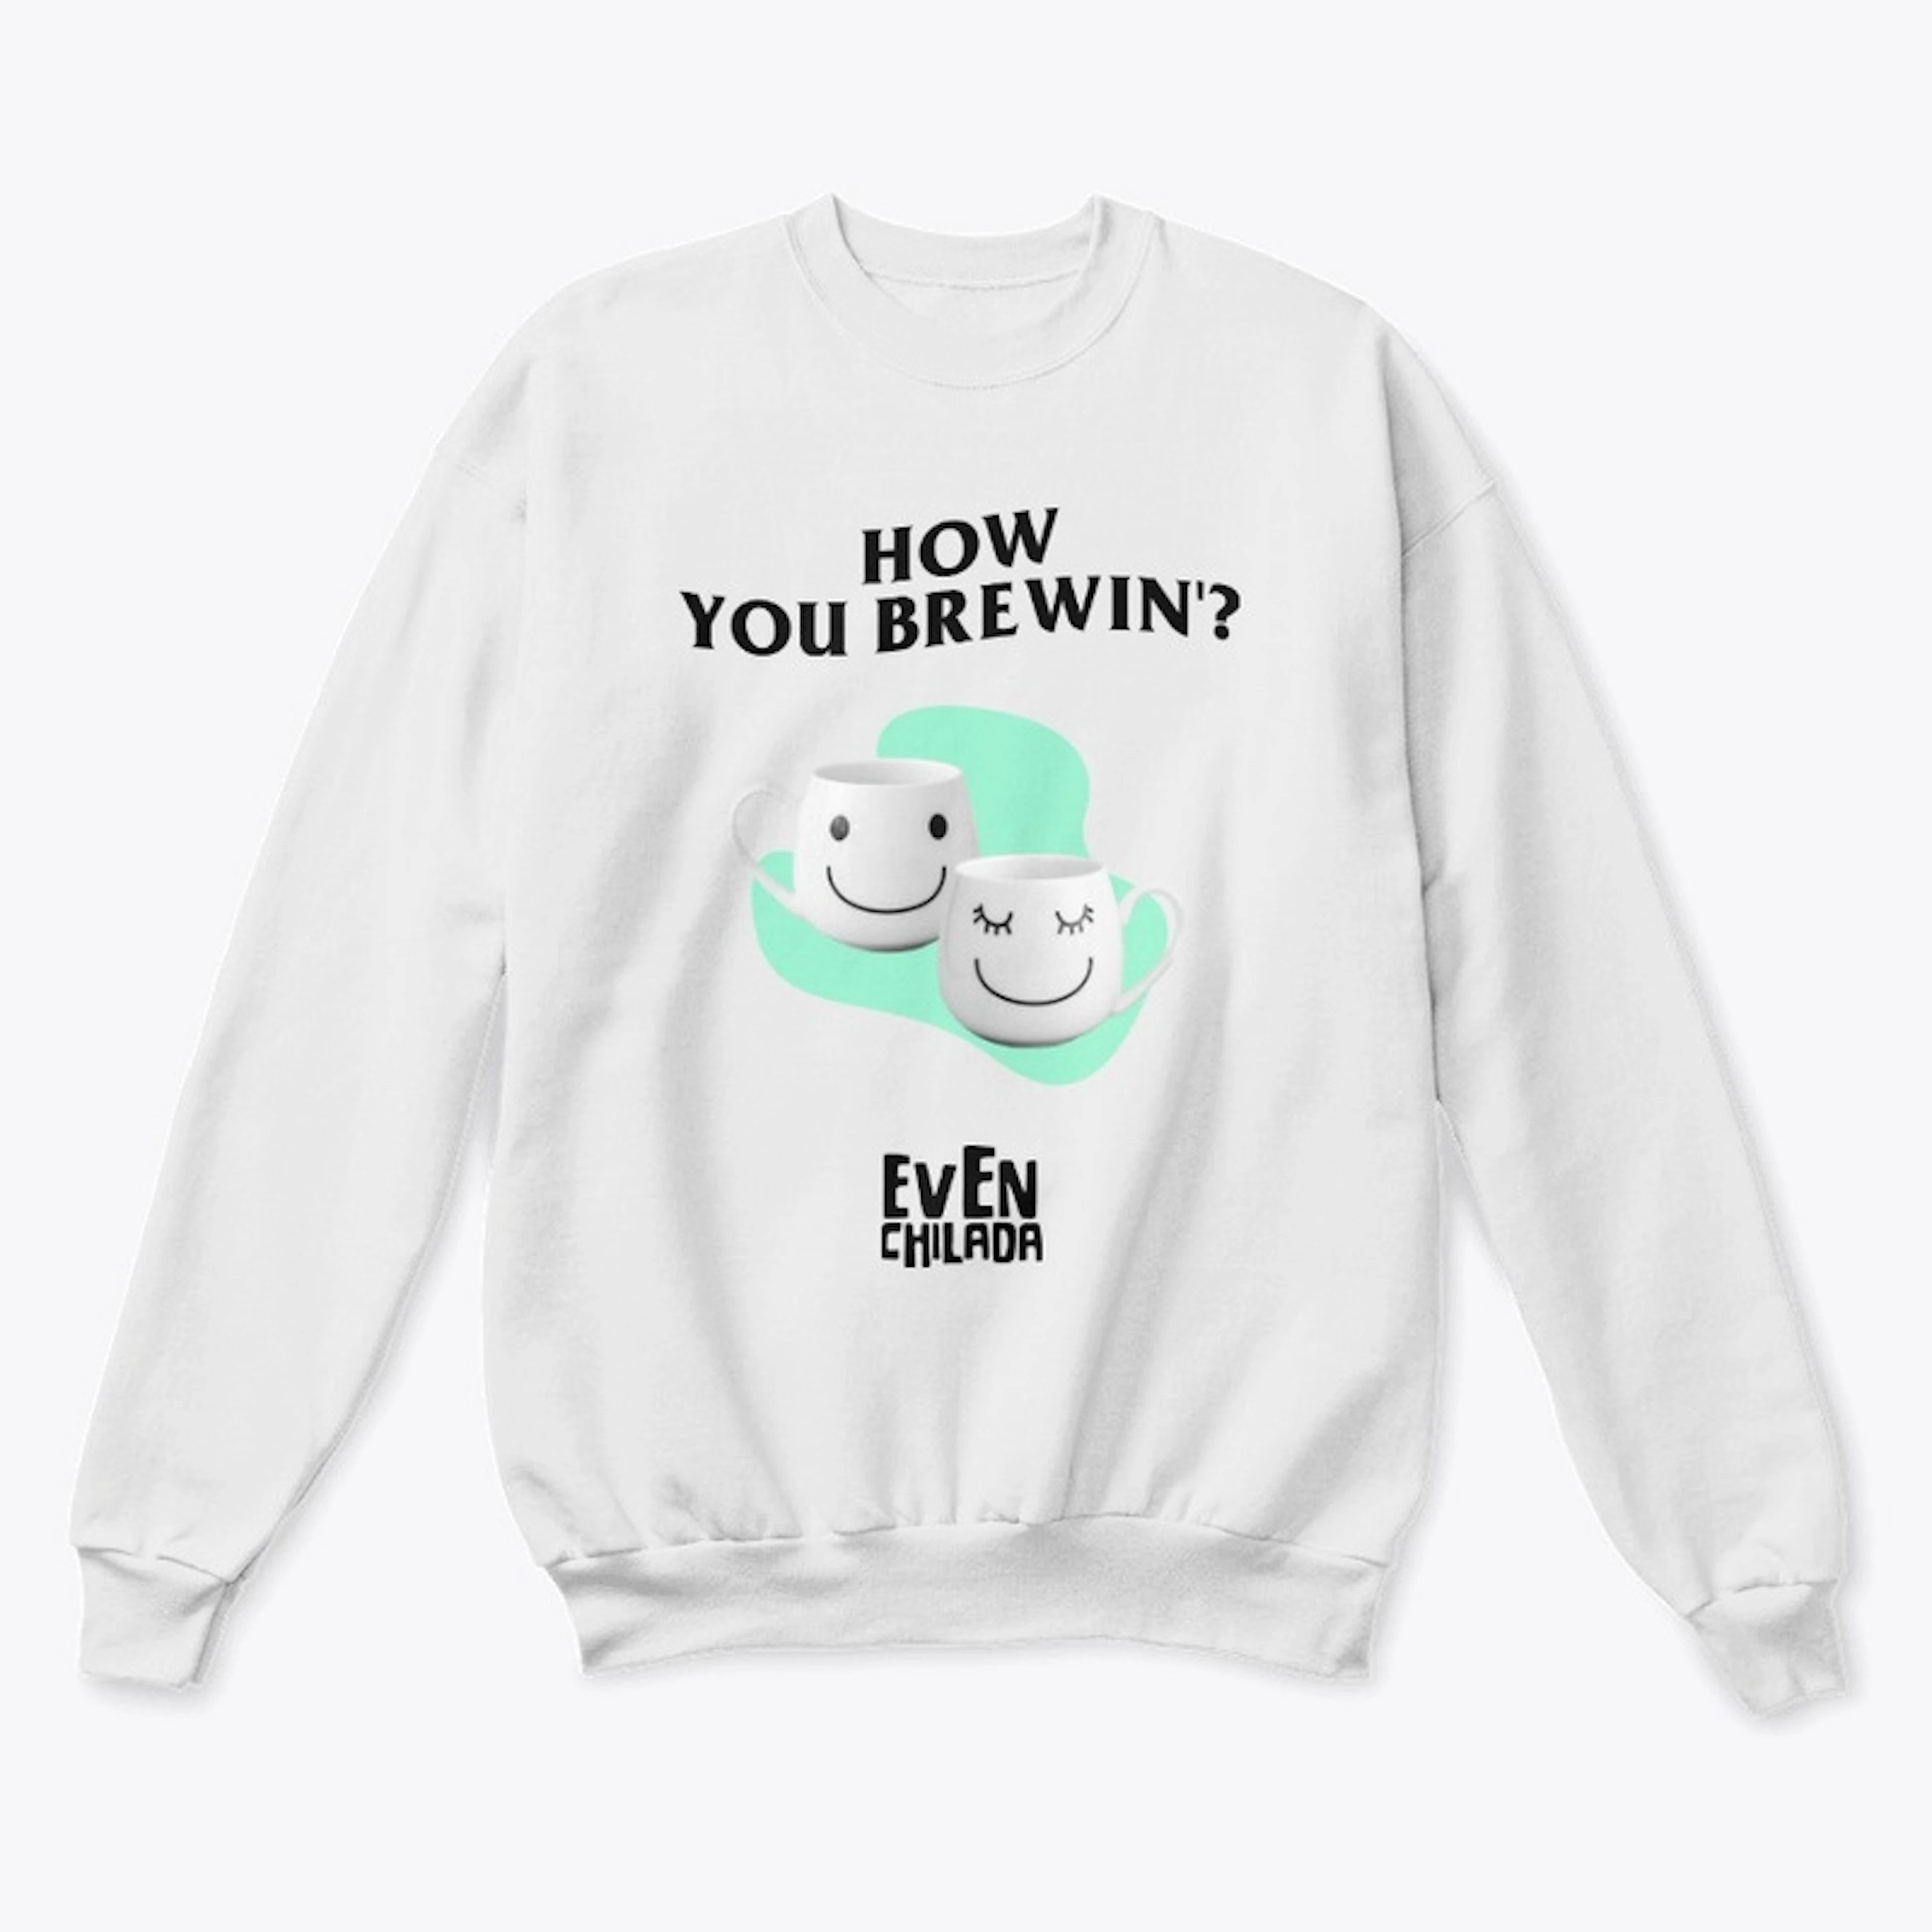 How You Brewin'?